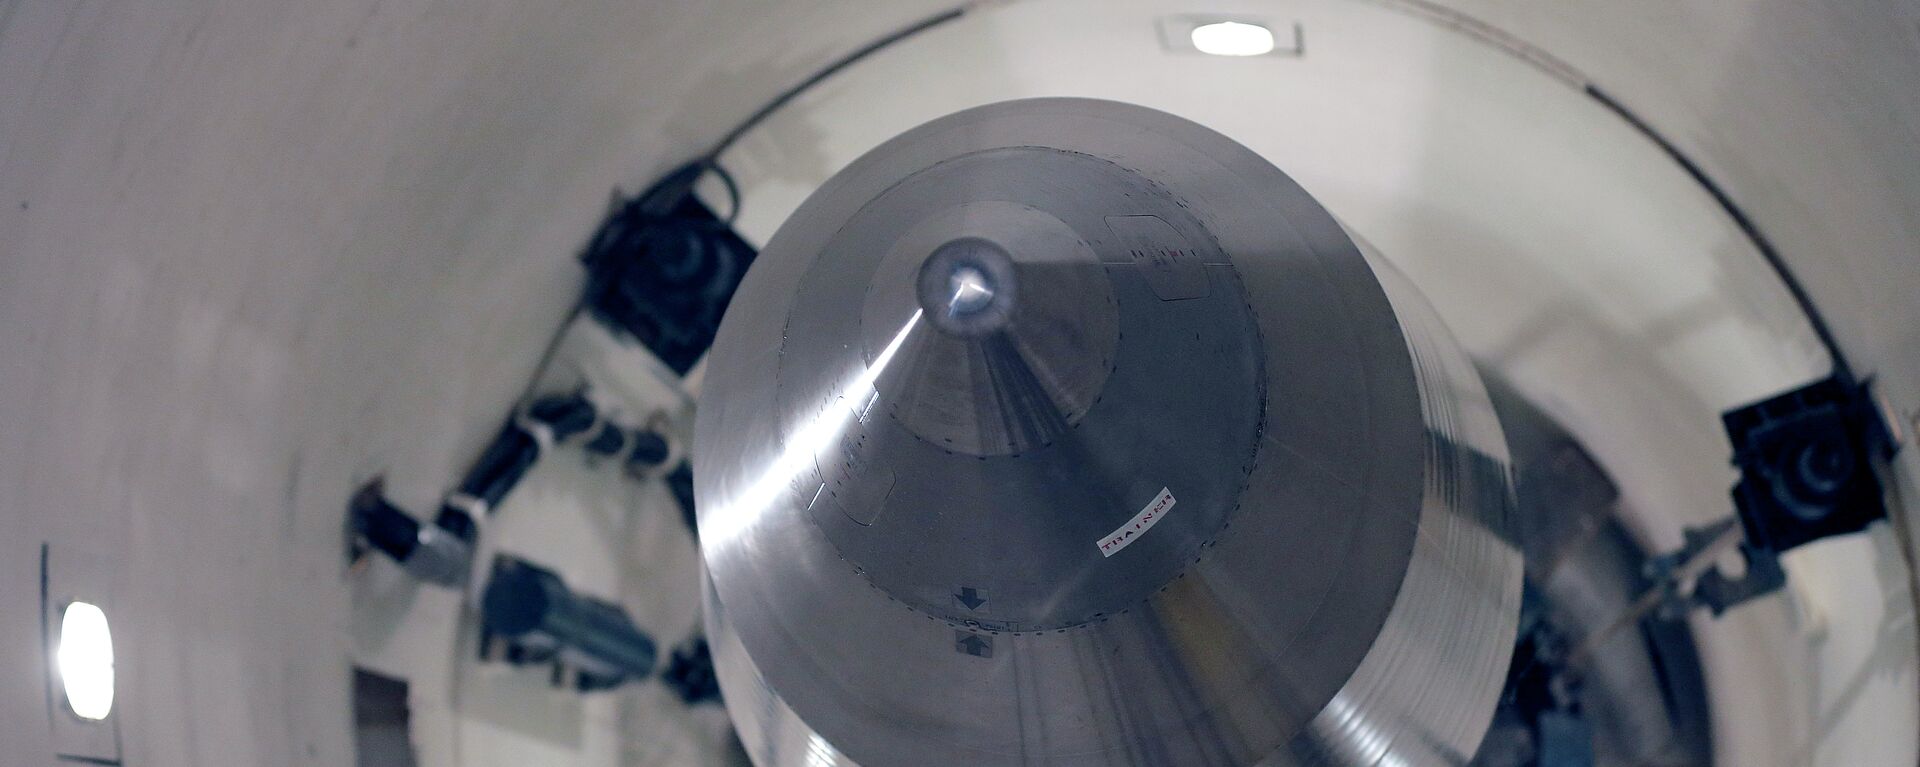 An inert Minuteman 3 missile is seen in a training launch tube at Minot Air Force Base, N.D. - Sputnik Mundo, 1920, 18.01.2017